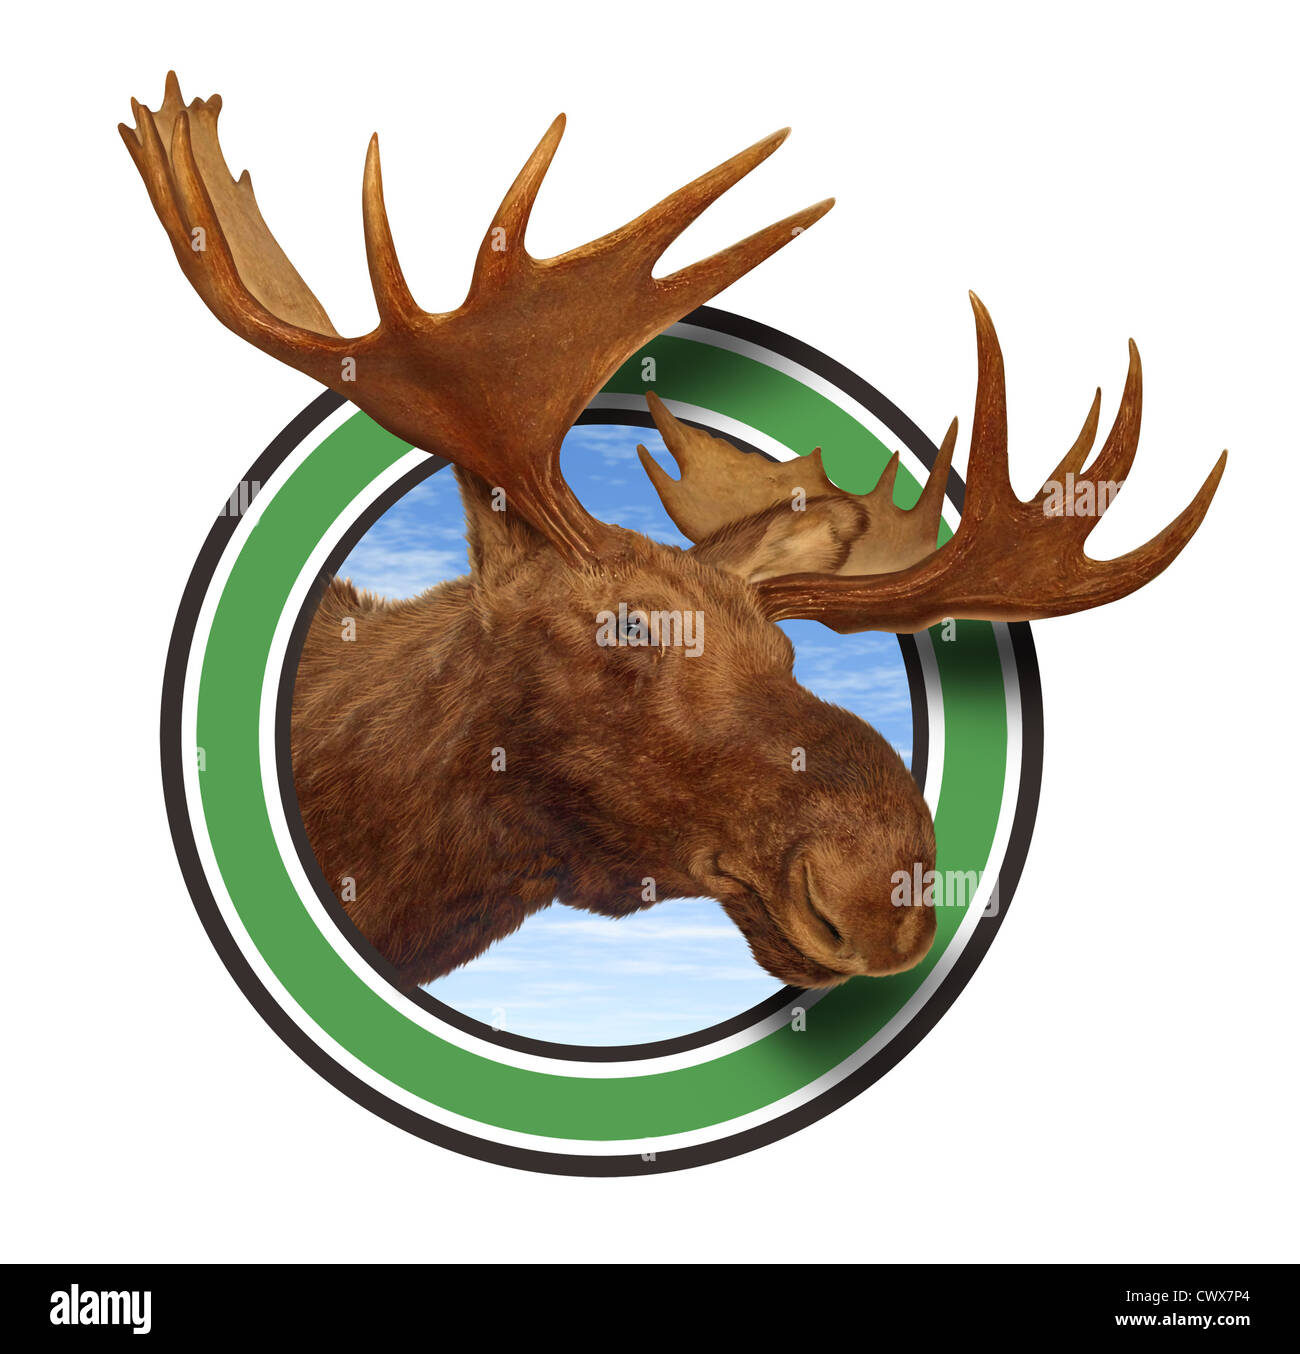 Moose head antler forest icon isolated on white background representing northern fauna from the wildlife of the Canadian and American north mountains for responsible hunting and natural preservation. Stock Photo